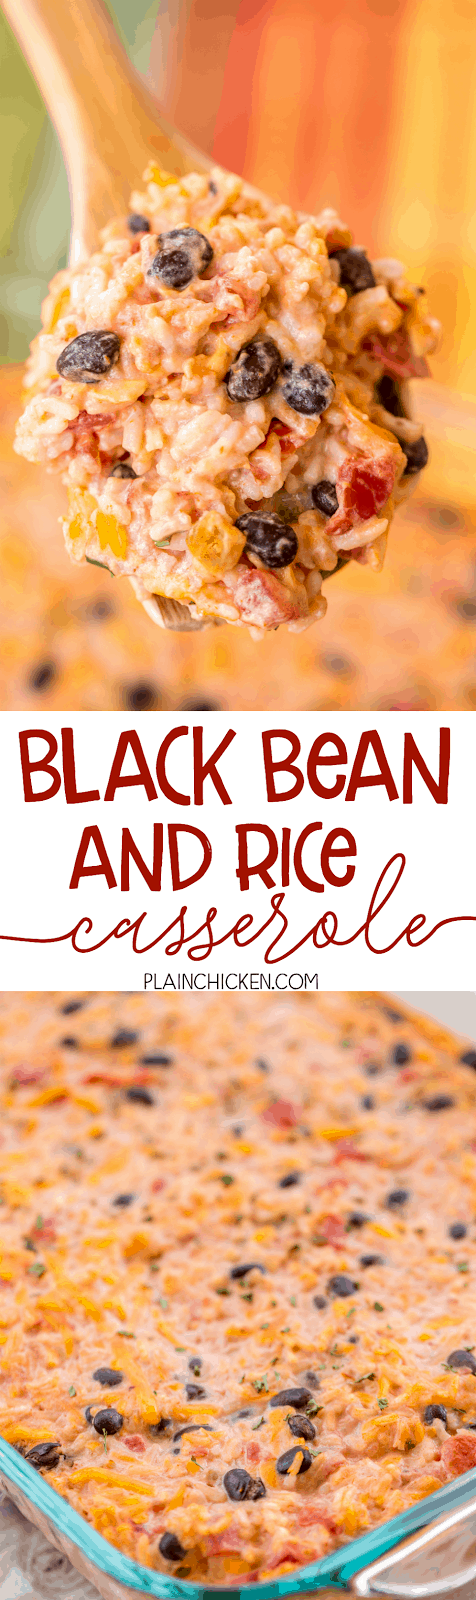 Black Bean and Rice Casserole - a quick and easy Mexican side dish! Can make ahead and refrigerate until ready to bake. Black beans, diced tomatoes and green chiles, tomato sauce, salsa, rice, sour cream and cheddar cheese. Makes a ton!!! Can serve as a side dish or meatless main dish. Also great served with chips for a dip. We LOVE this easy side dish recipe!